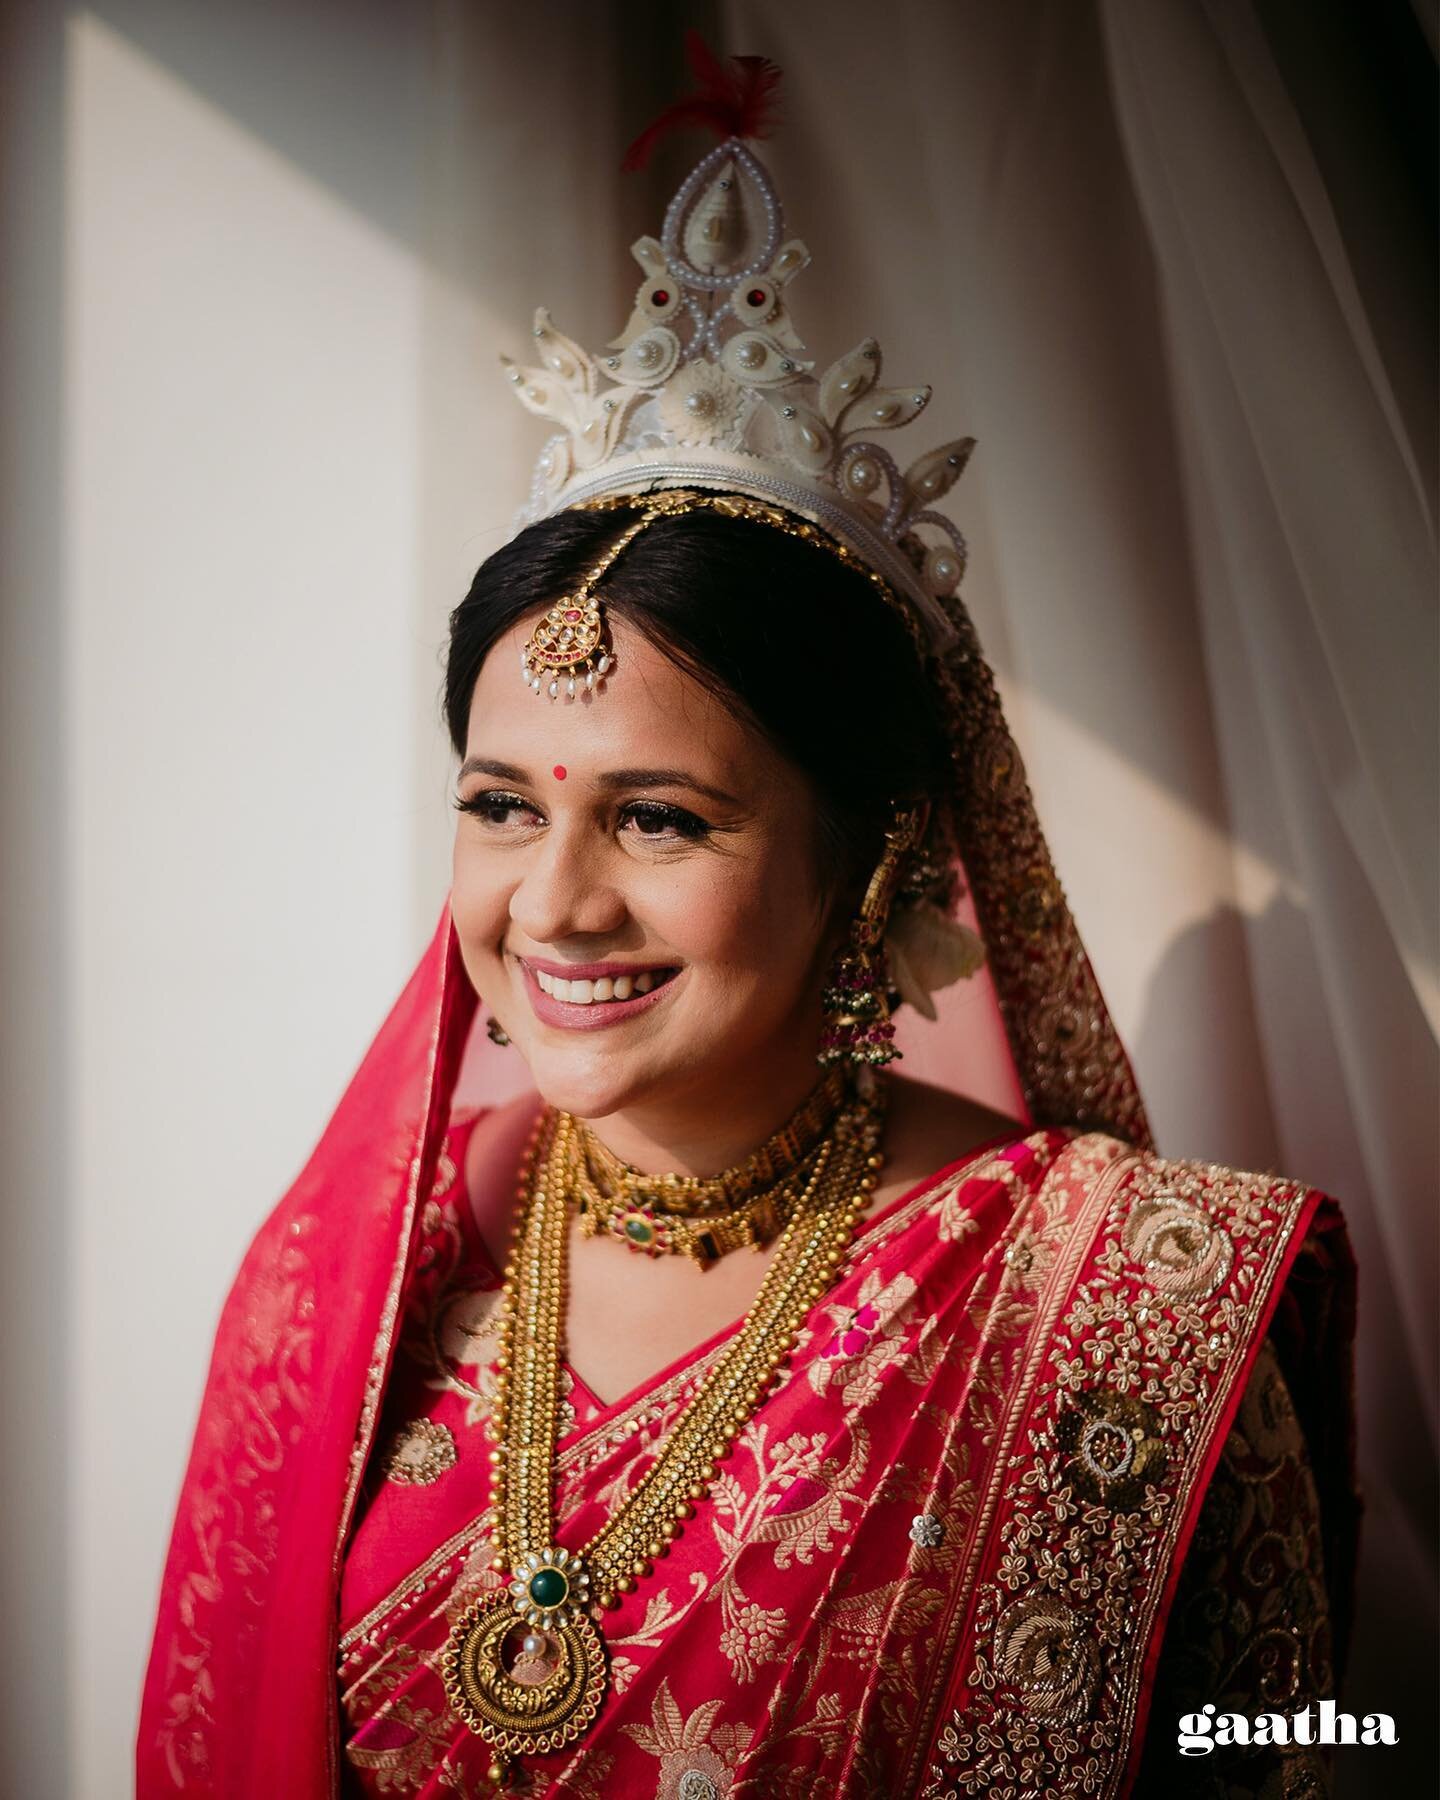 &quot;From one stunning bride to another - a legacy of beauty and grace passed down from mother to daughter.&quot;

Shot by @i_am_anshuman_gaikwad alongside @_rachanakaar_ 
MUA @priyatodarwal 

#gaatha #bridesofgaatha #bride #bridalphotography  #wedd